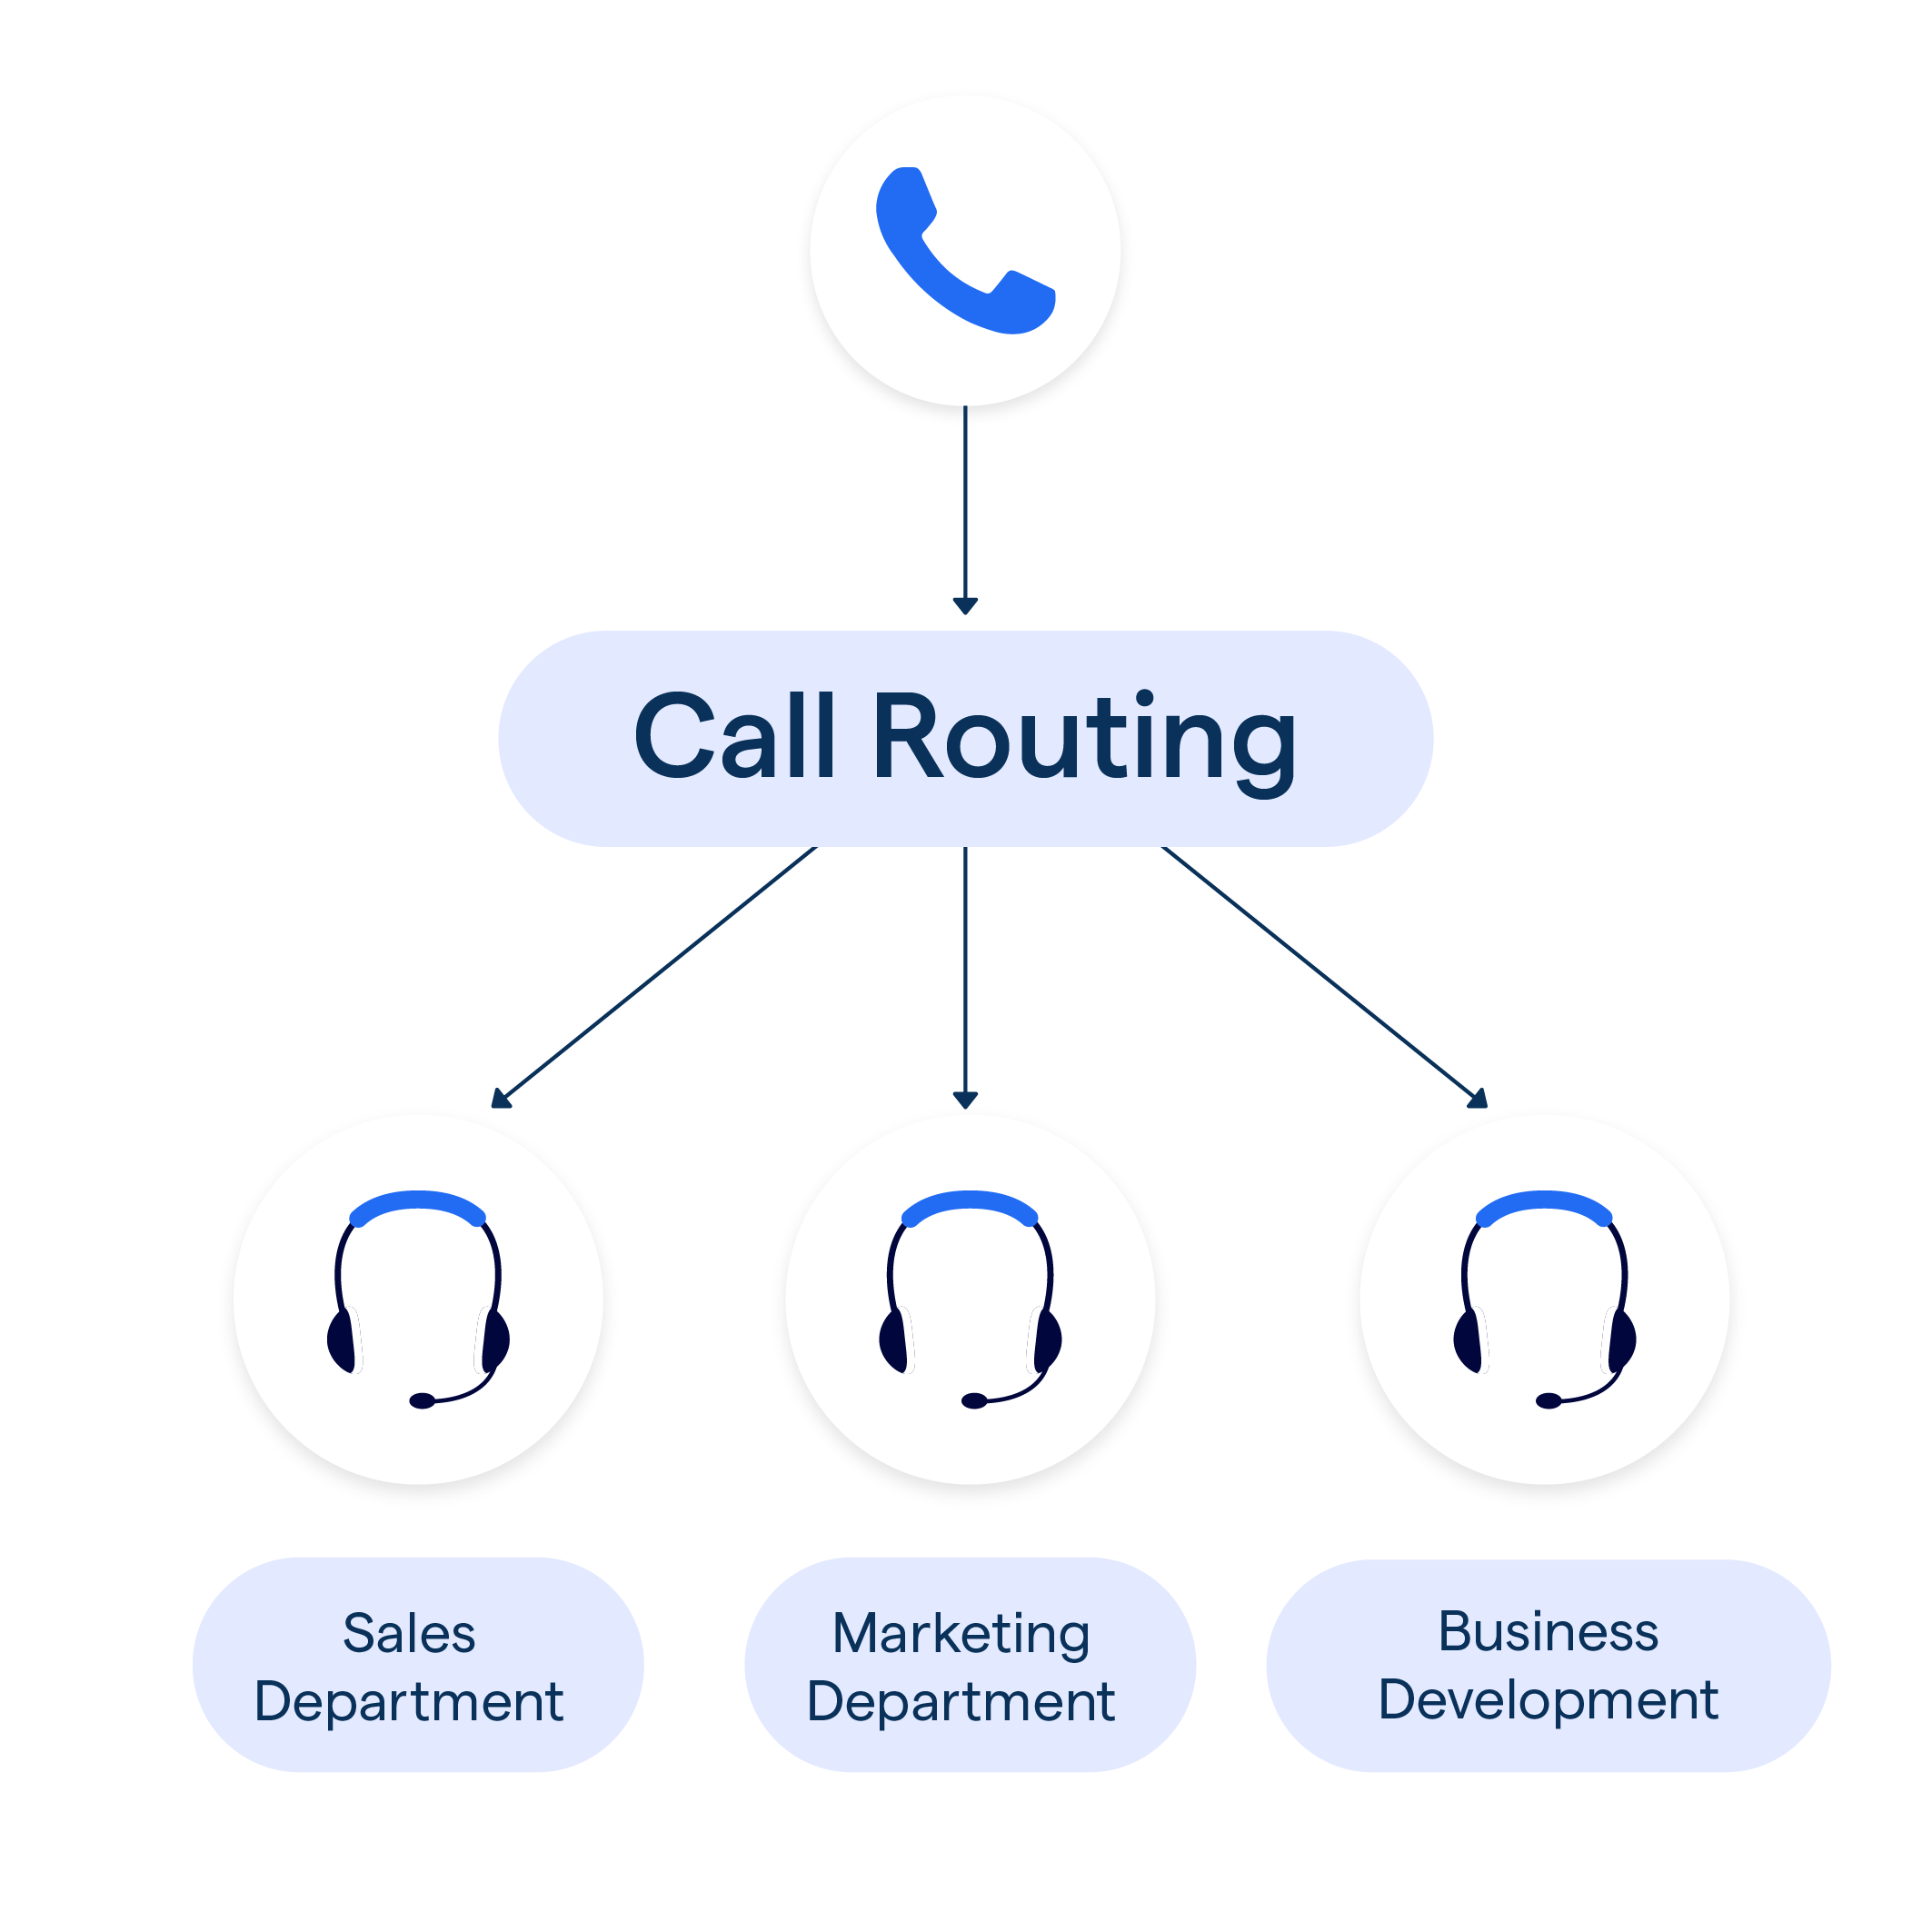 What is Call Routing?